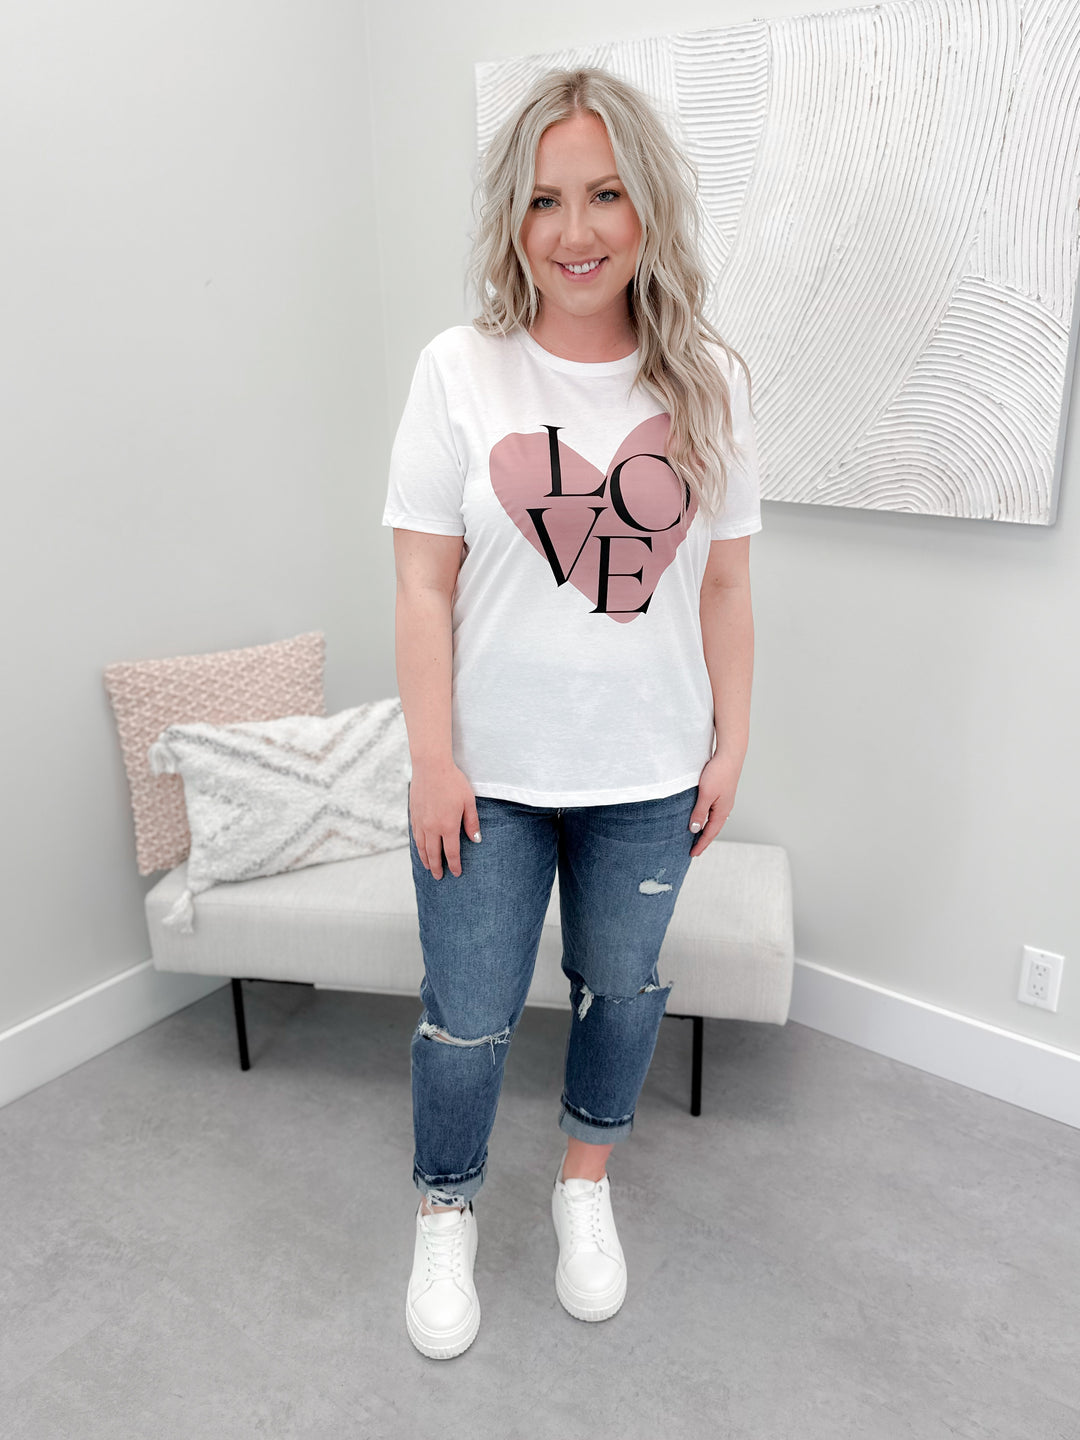 Love Skips A Beat Tee by Ash + Antler